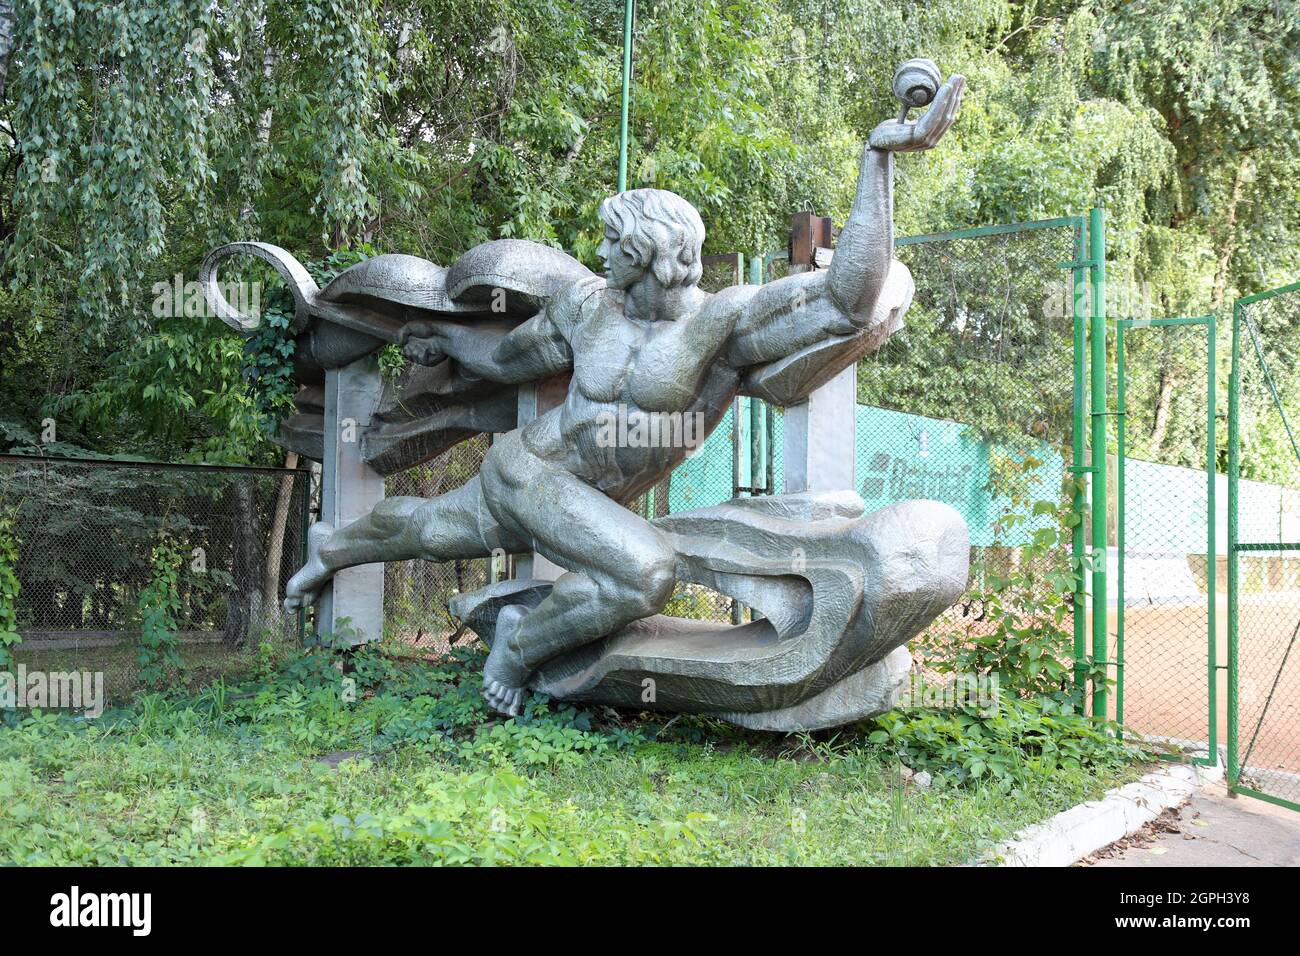 Soviet sculpture of a tennis player in Chisinau Stock Photo